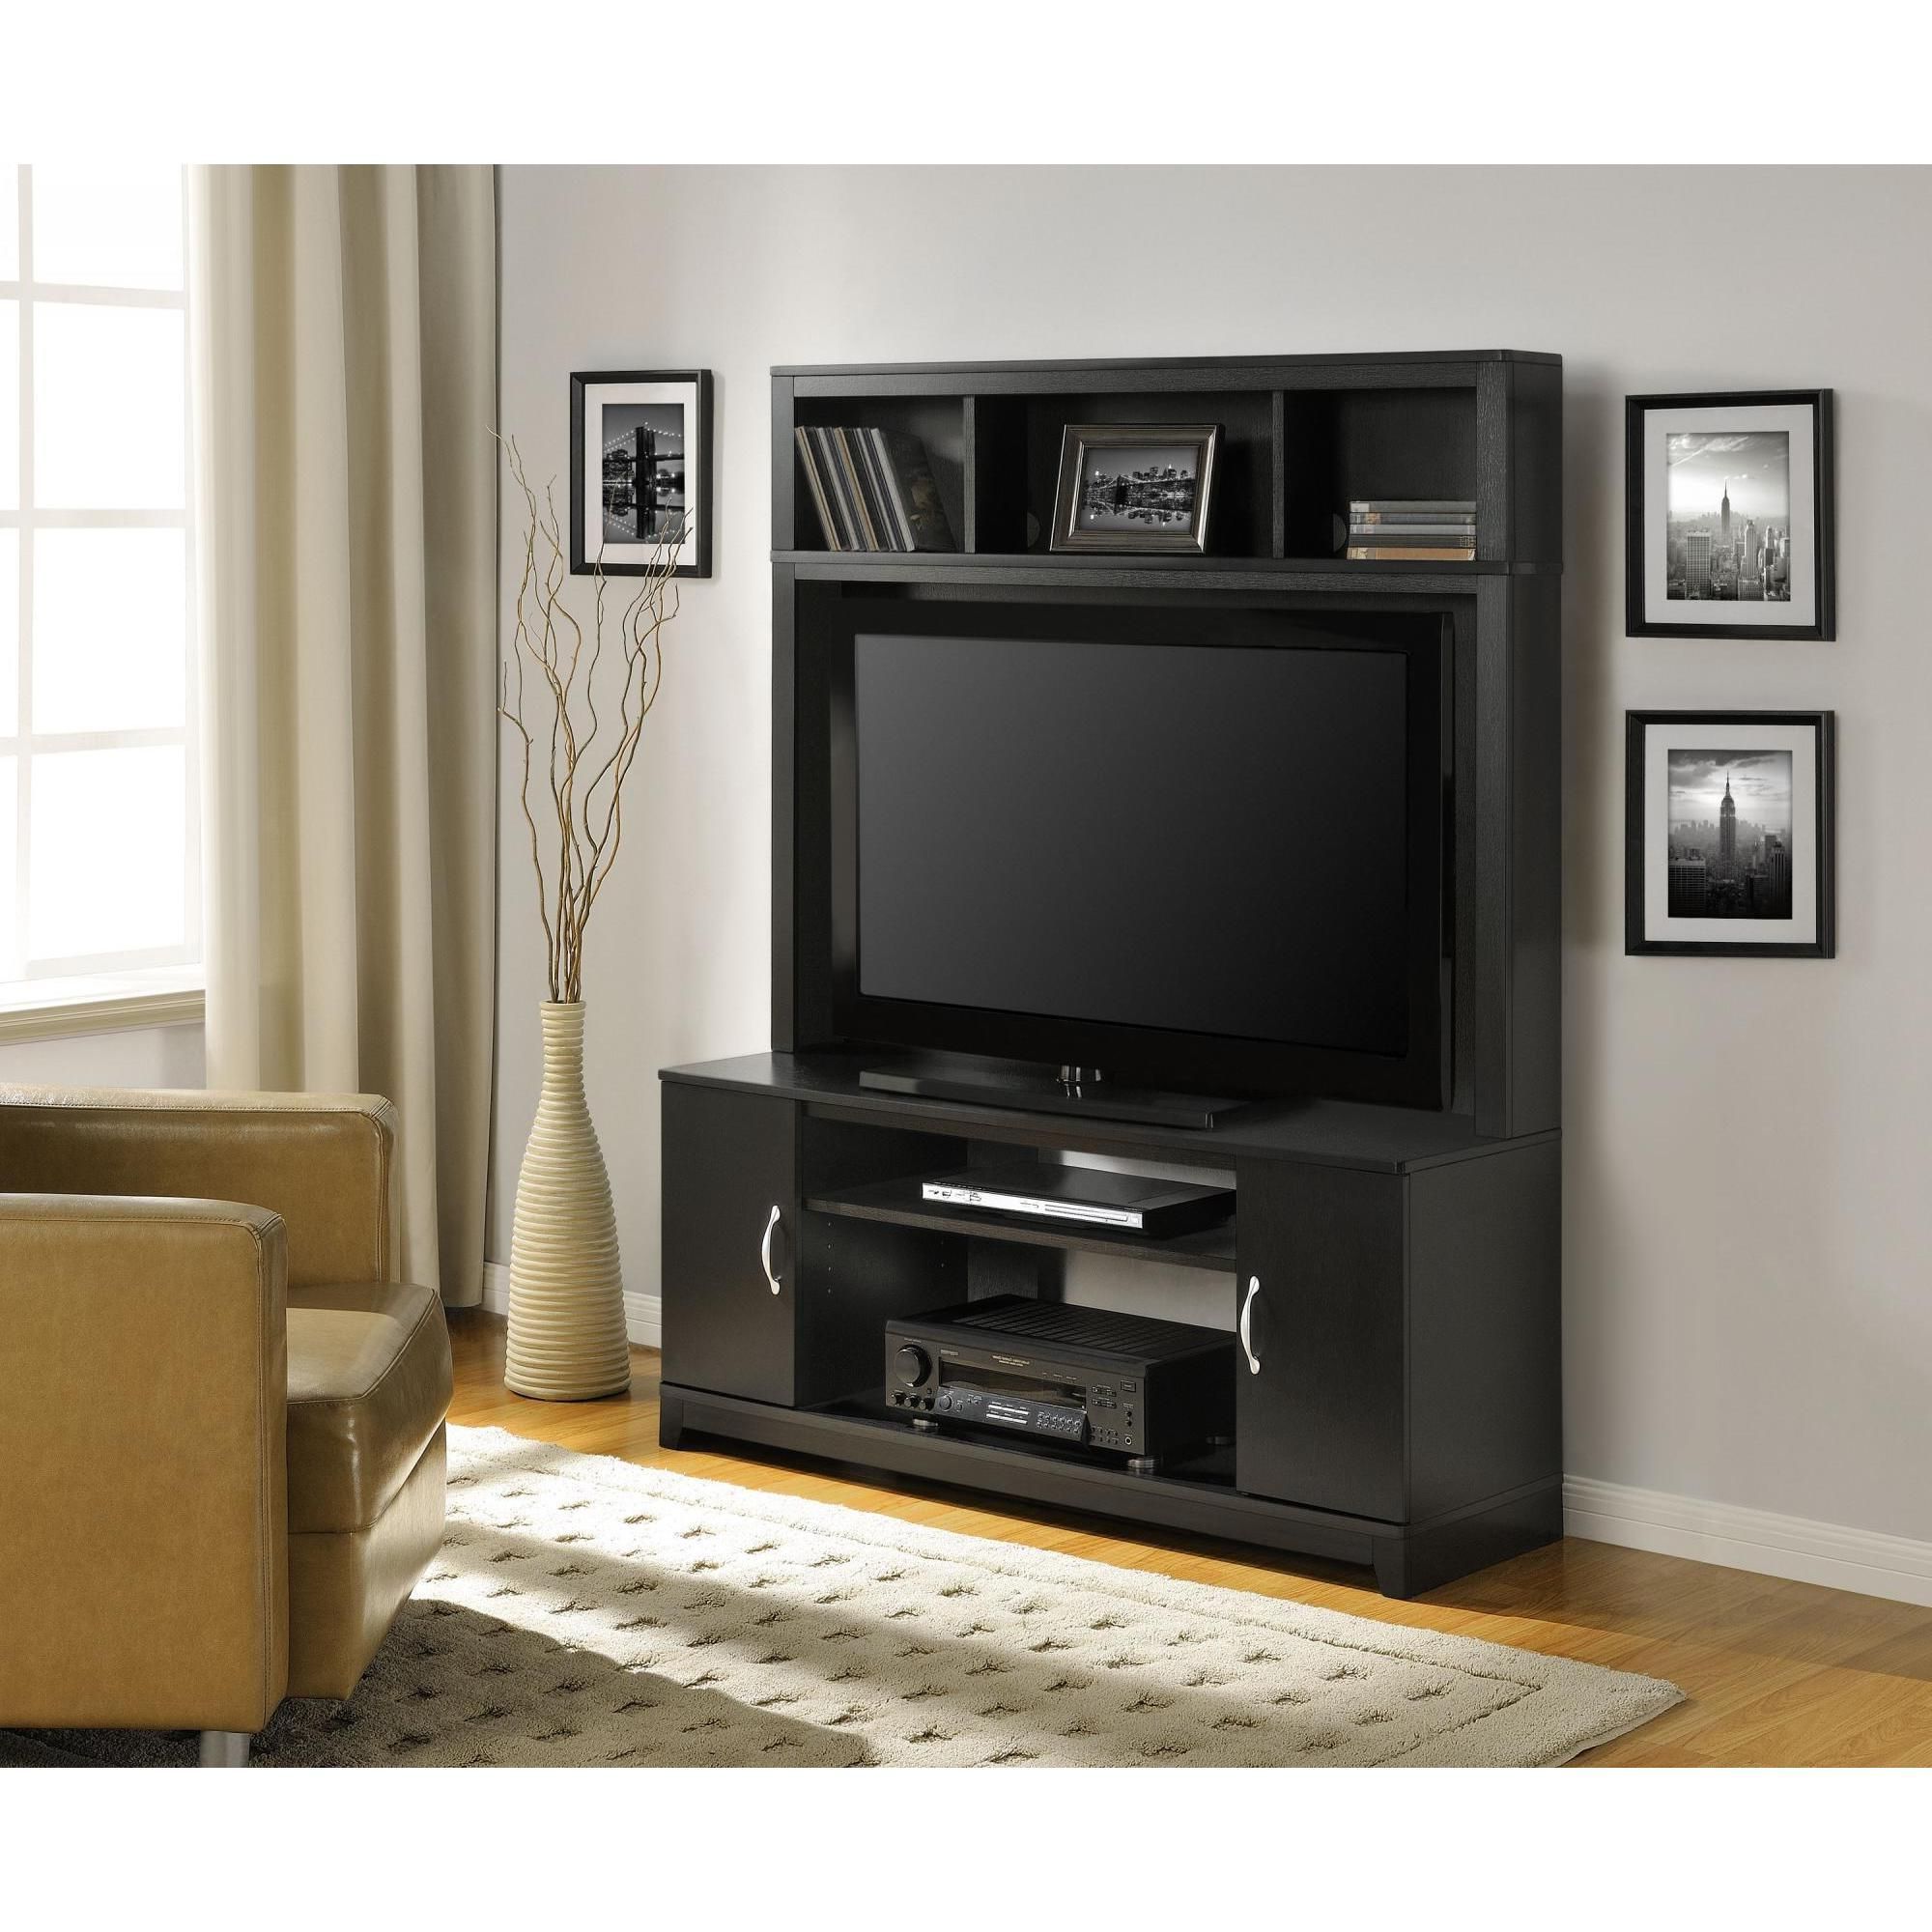 Recent Online Shopping – Bedding, Furniture, Electronics, Jewelry, Clothing Within Black Rgb Entertainment Centers (View 11 of 15)